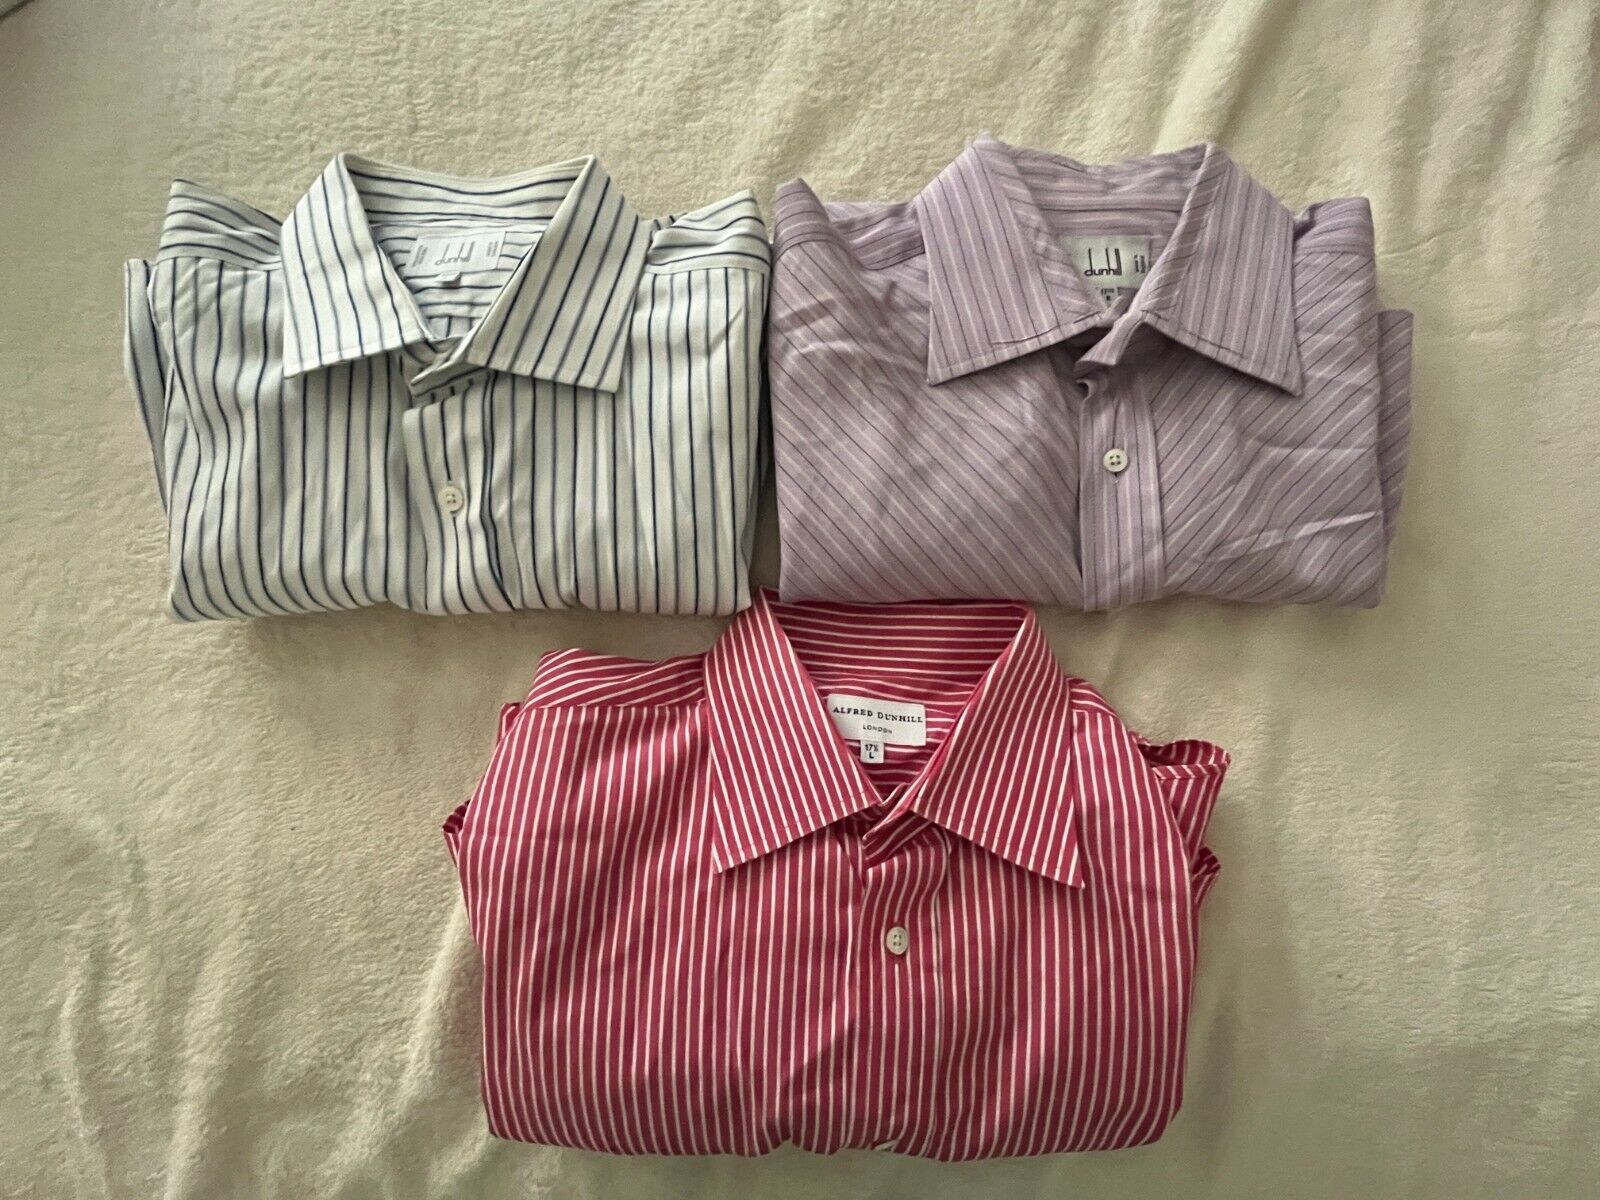 Judd's Lot of 3 Excellent Dunhill Dress Shirts Men's Size 17-1/2